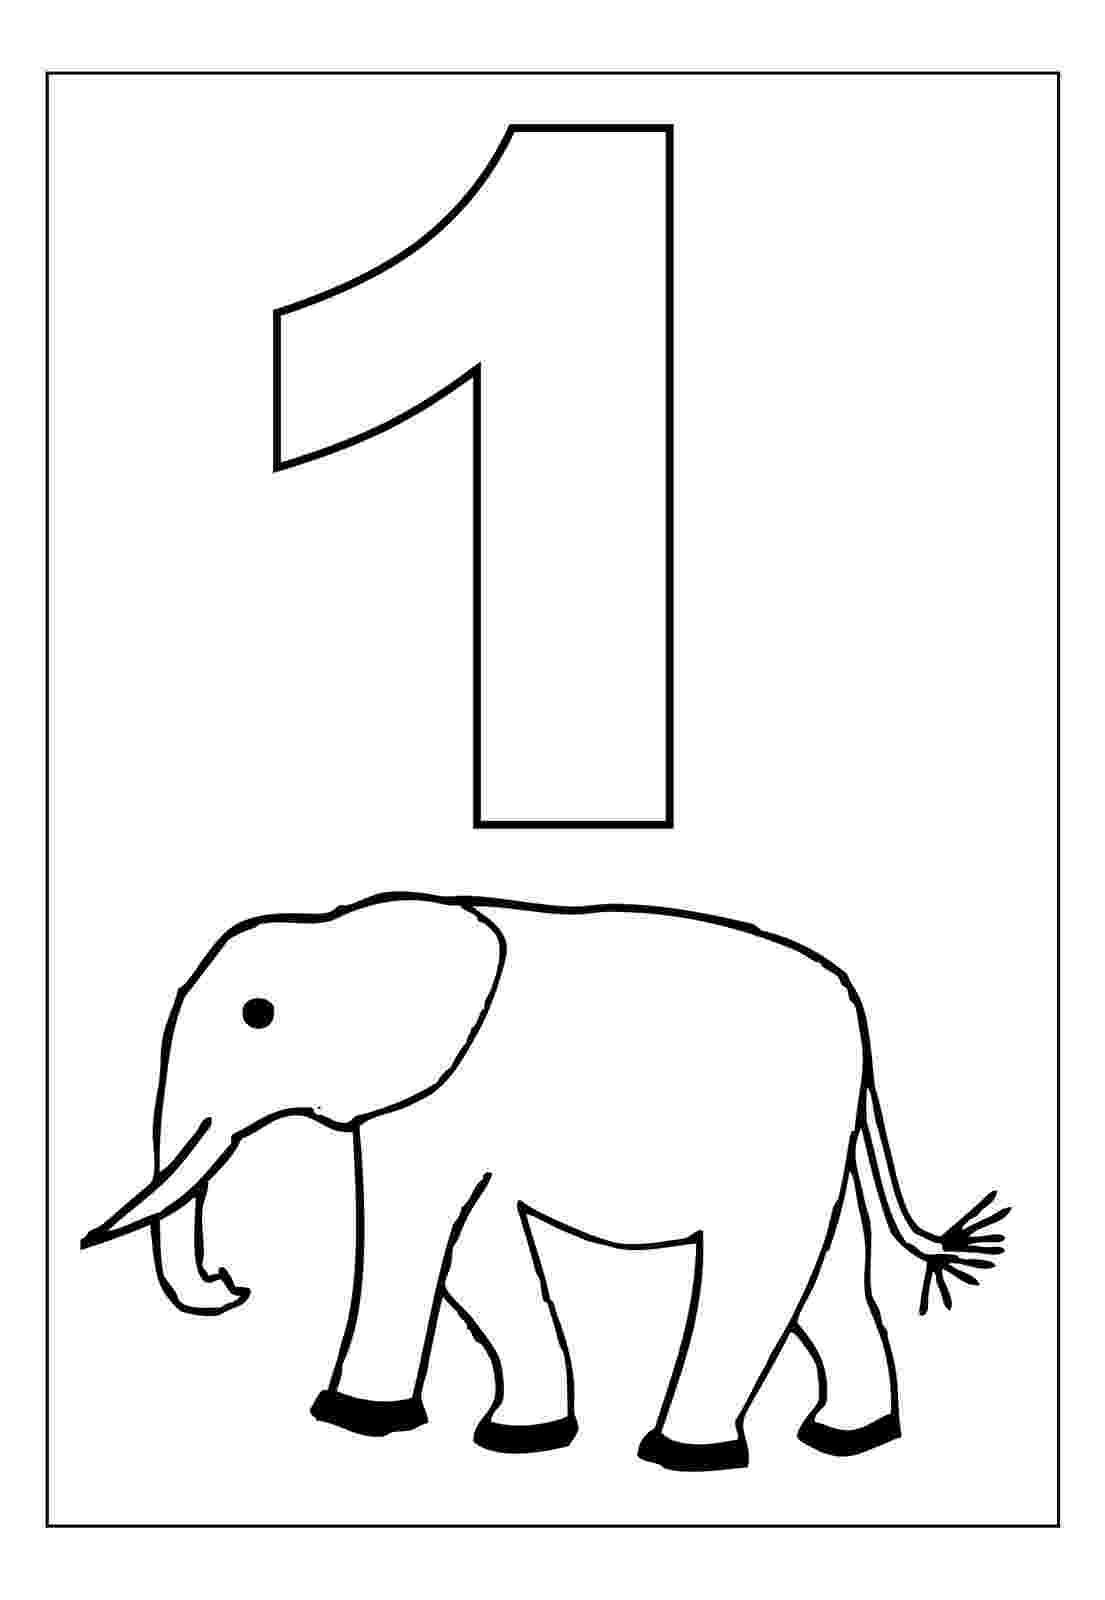 number 1 coloring page number 1 coloring page 1 number coloring page 